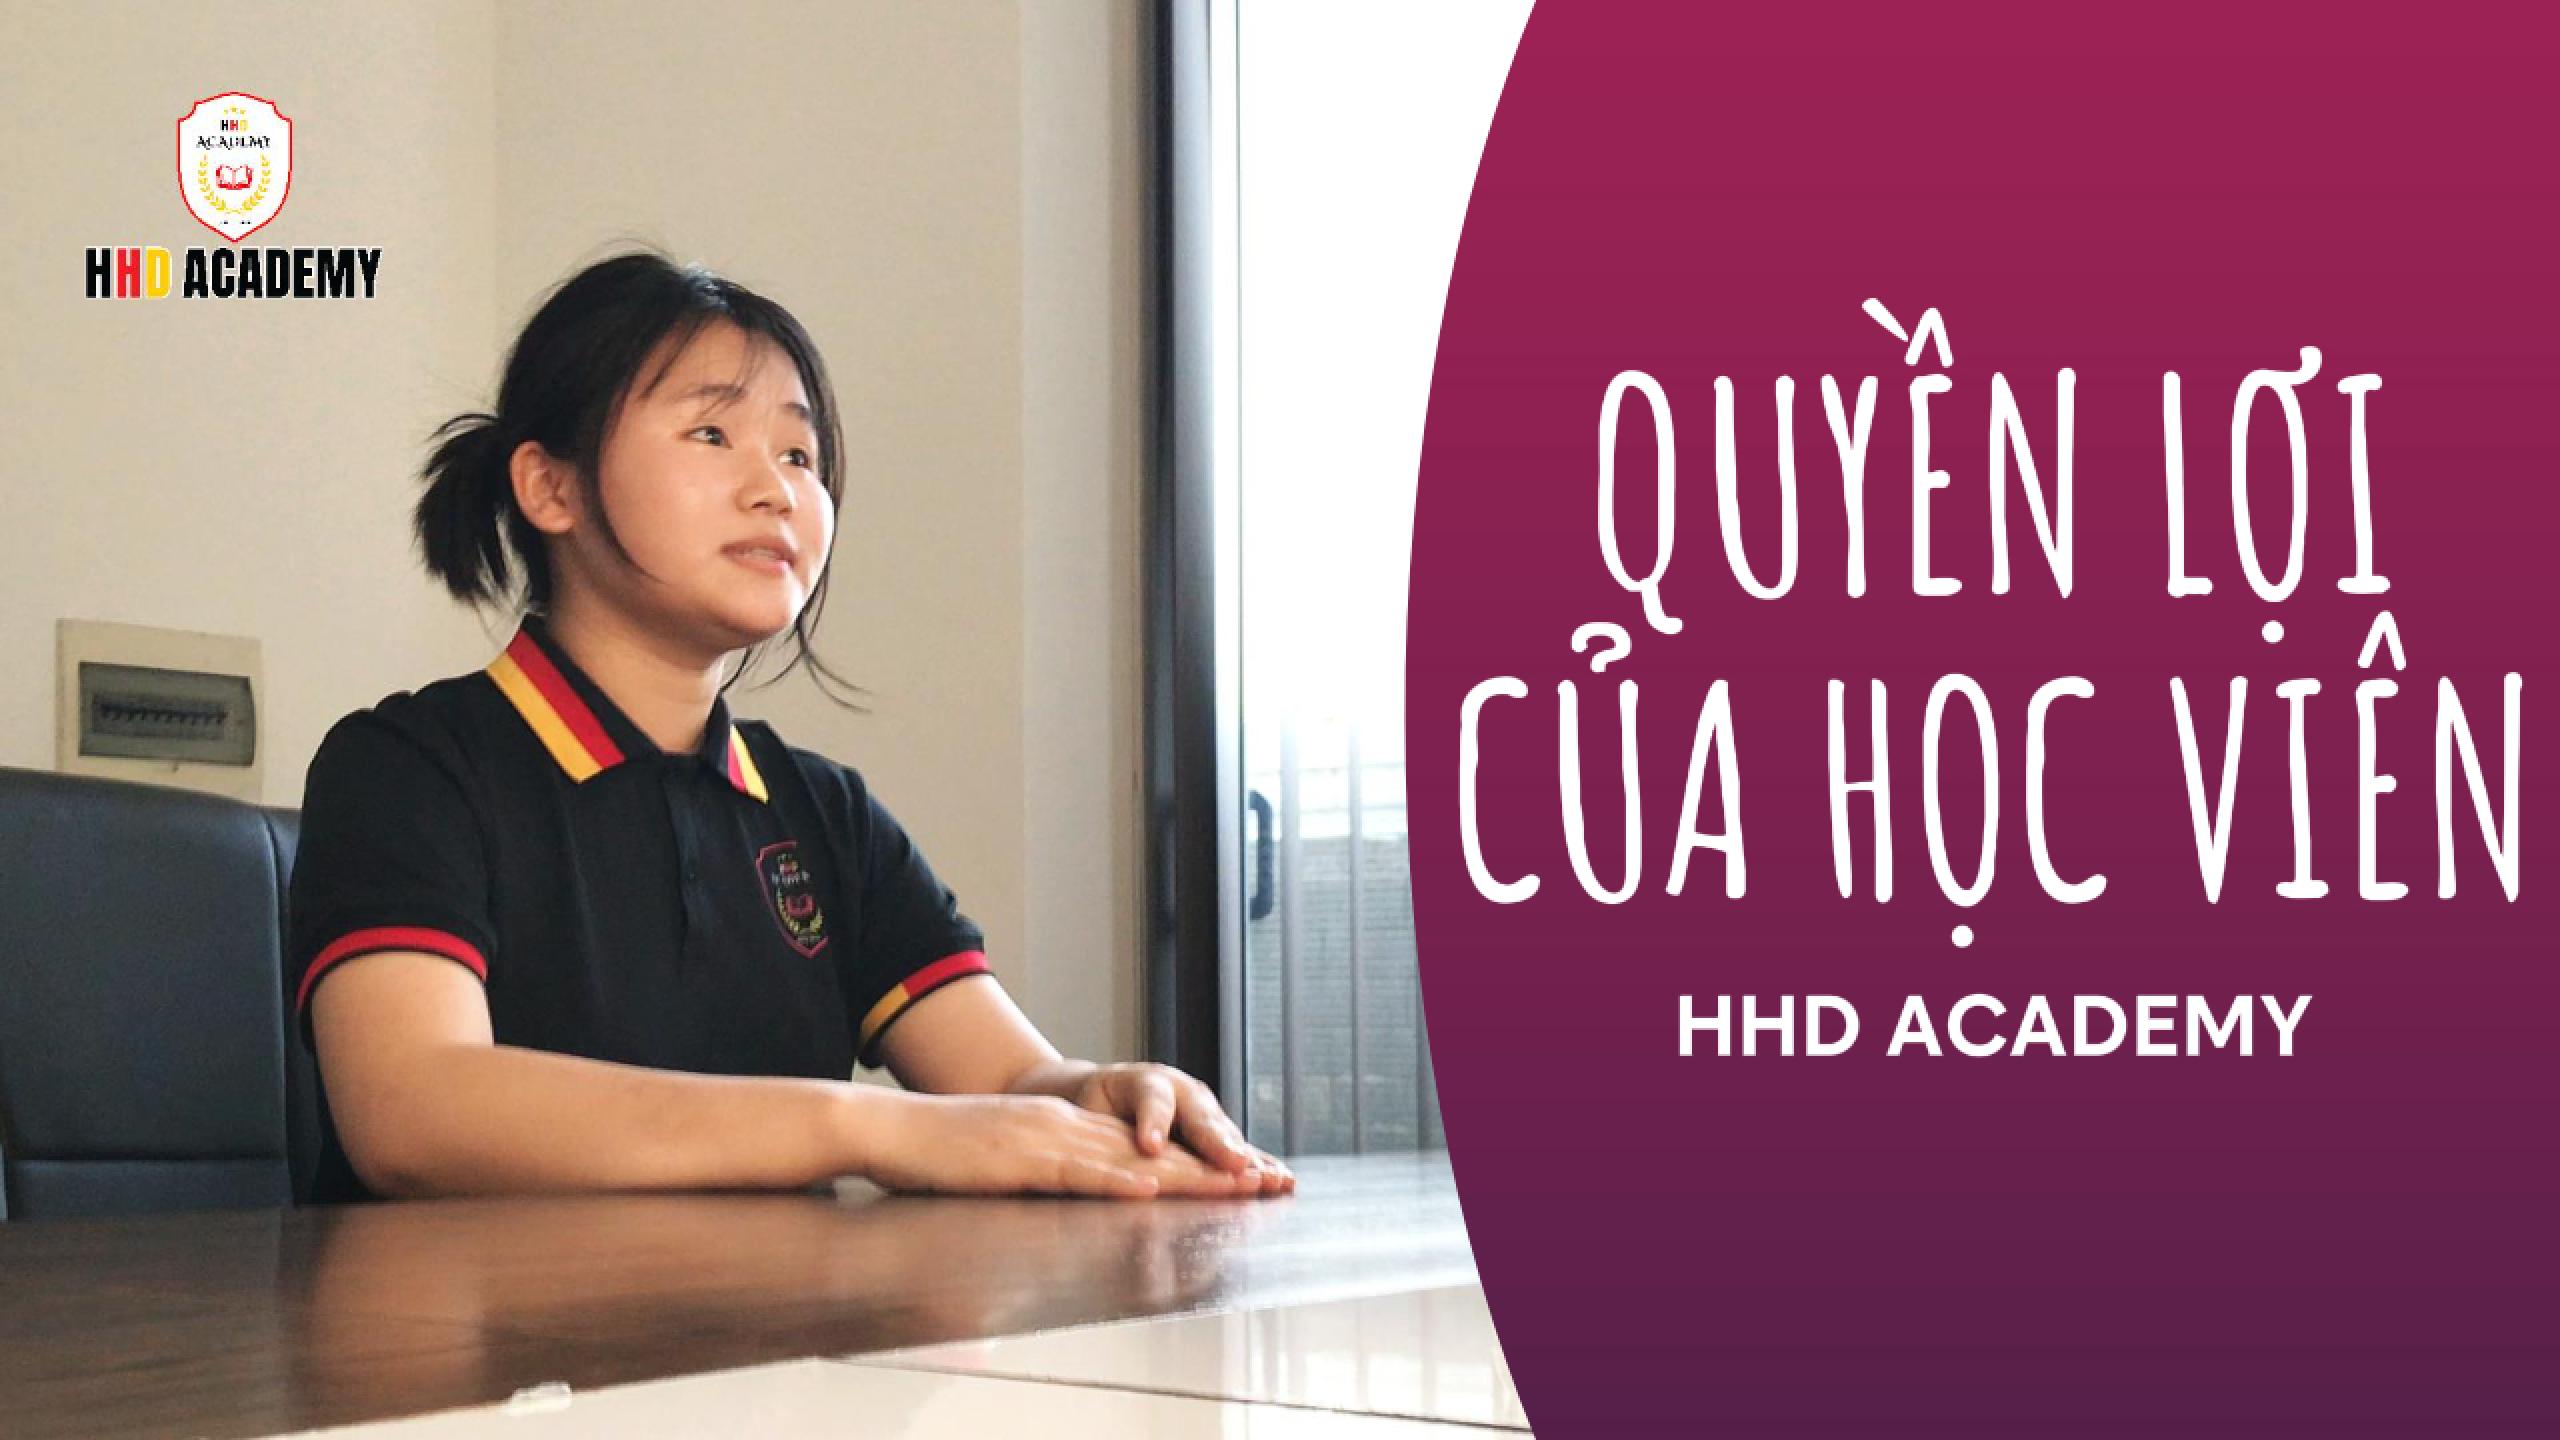 SPECIAL BENEFITS FOR STUDENTS AT HHD ACADEMY